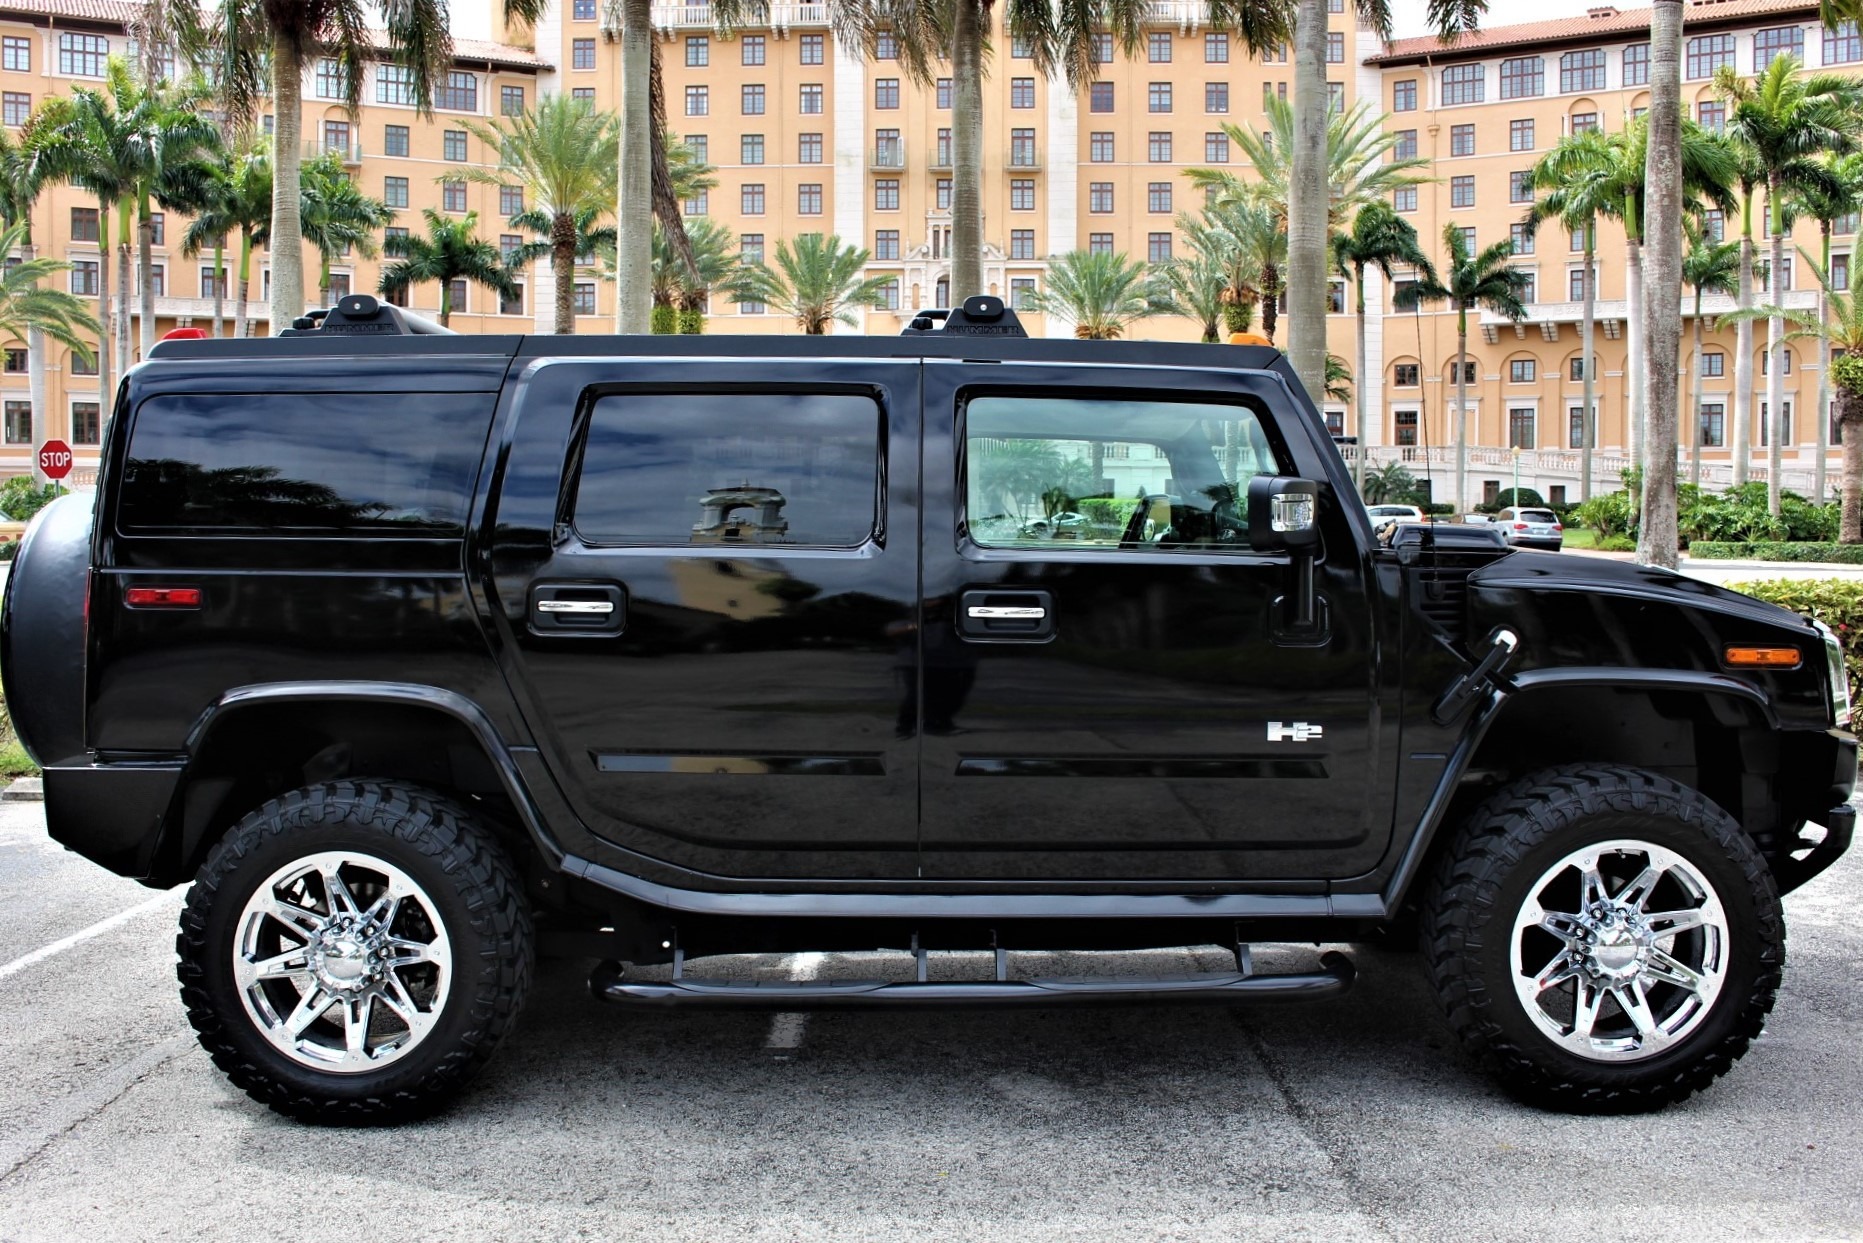 Used 2007 HUMMER H2 for sale Sold at The Gables Sports Cars in Miami FL 33146 1